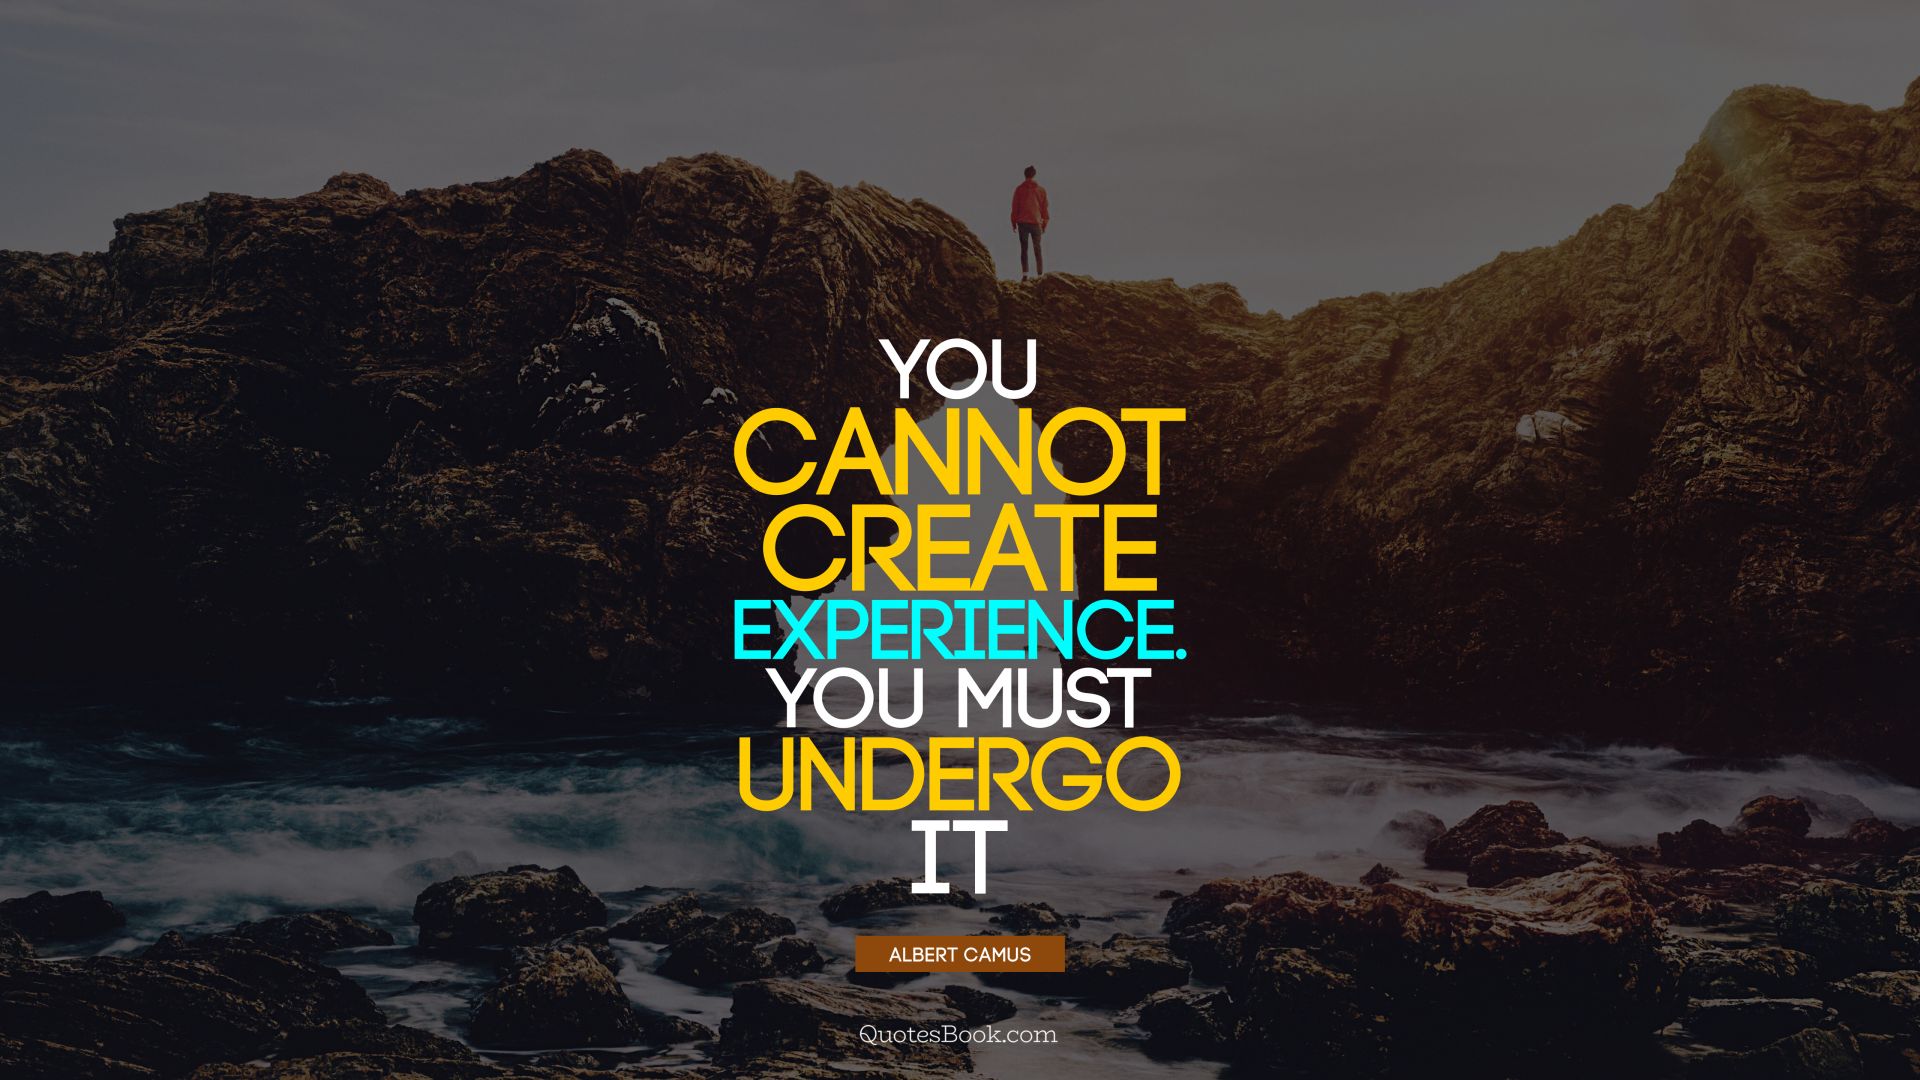 You cannot create experience. You must undergo it. - Quote by Albert Camus